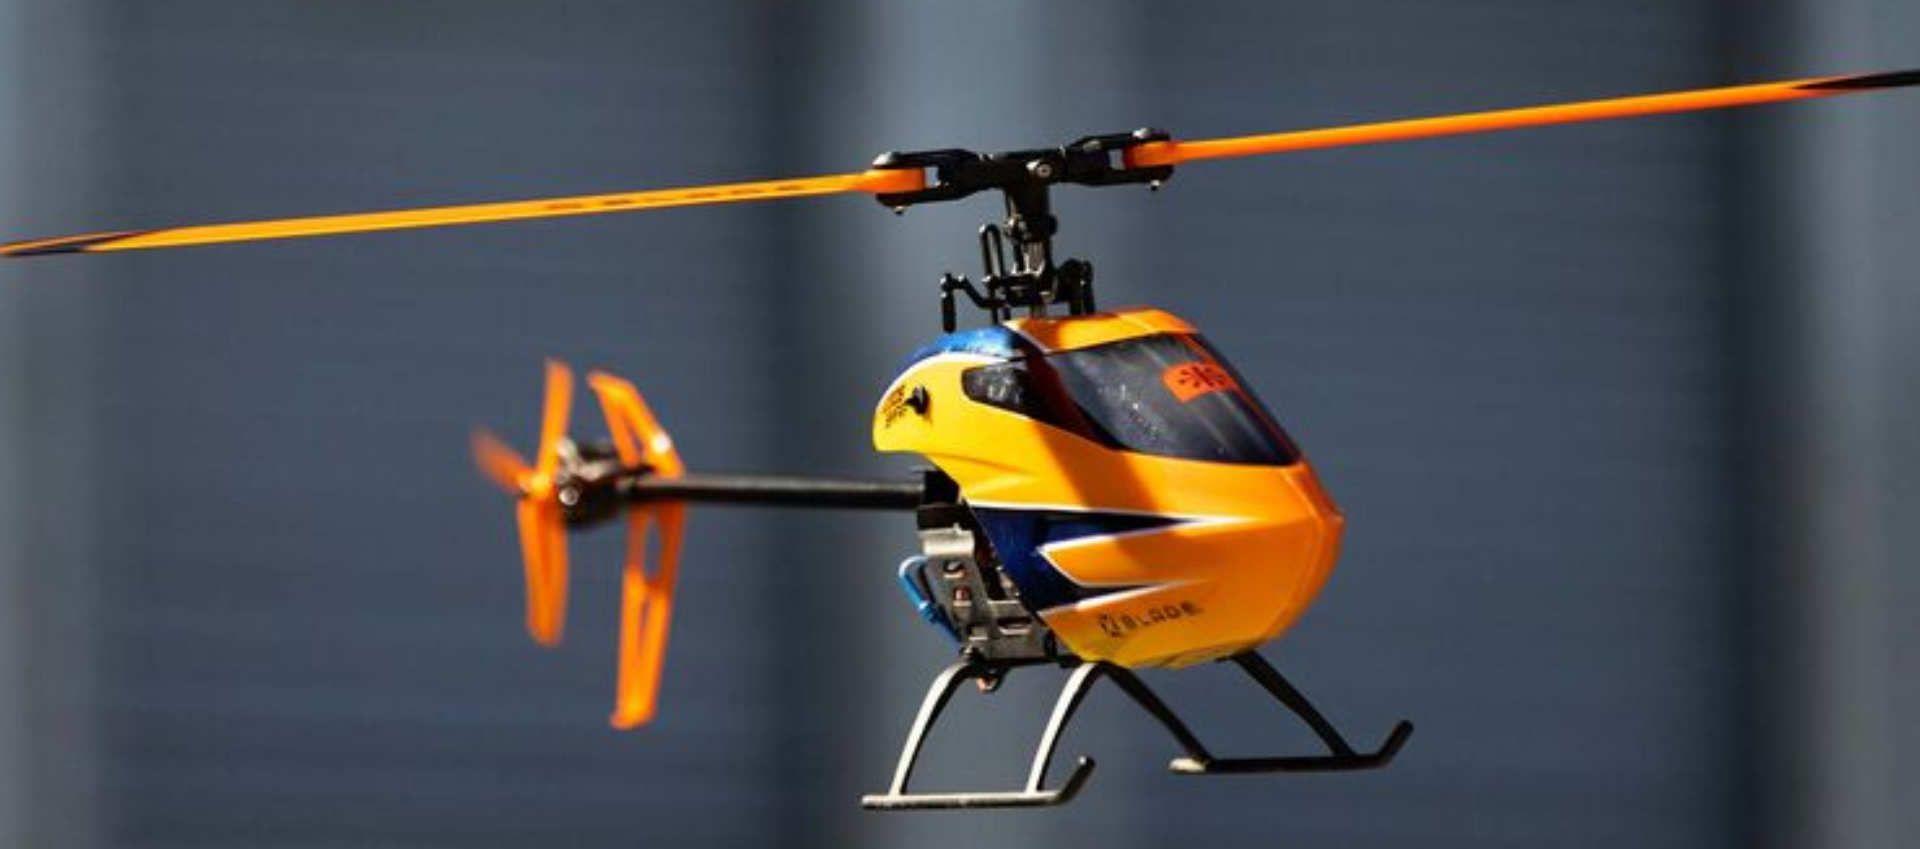 Blade Helicopters For Sale: The Best Options for Purchasing a Blade Helicopter